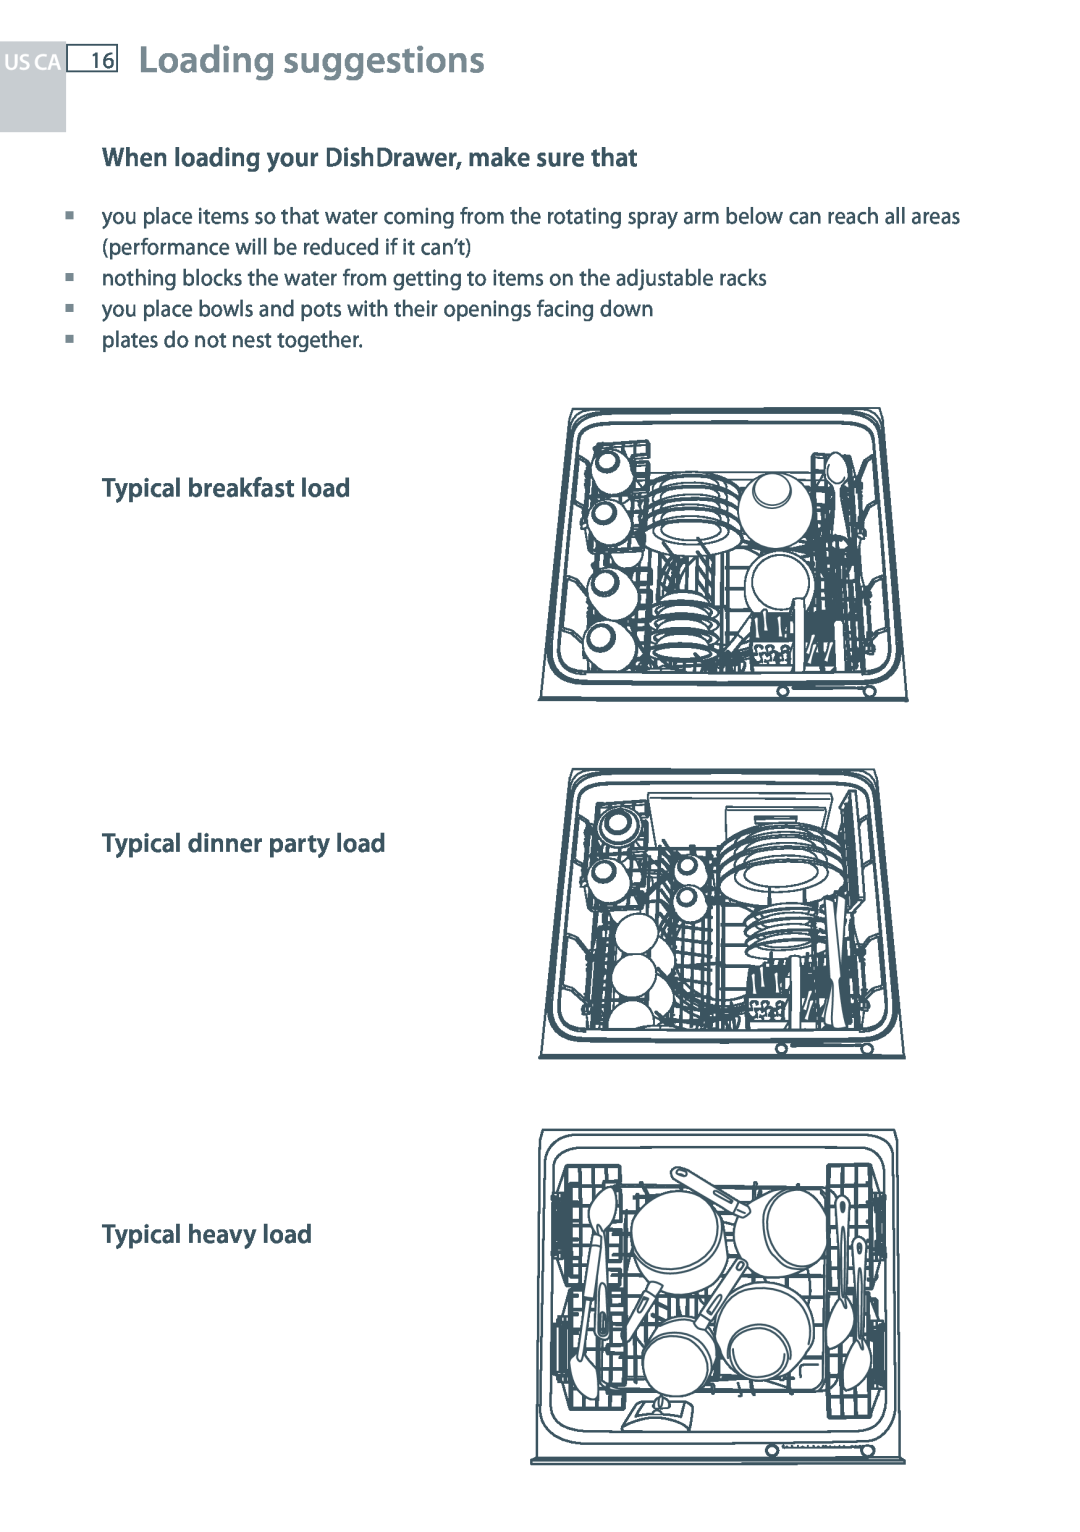 Fisher & Paykel DD24 manual Loading suggestions, When loading your DishDrawer, make sure that, Us Ca 